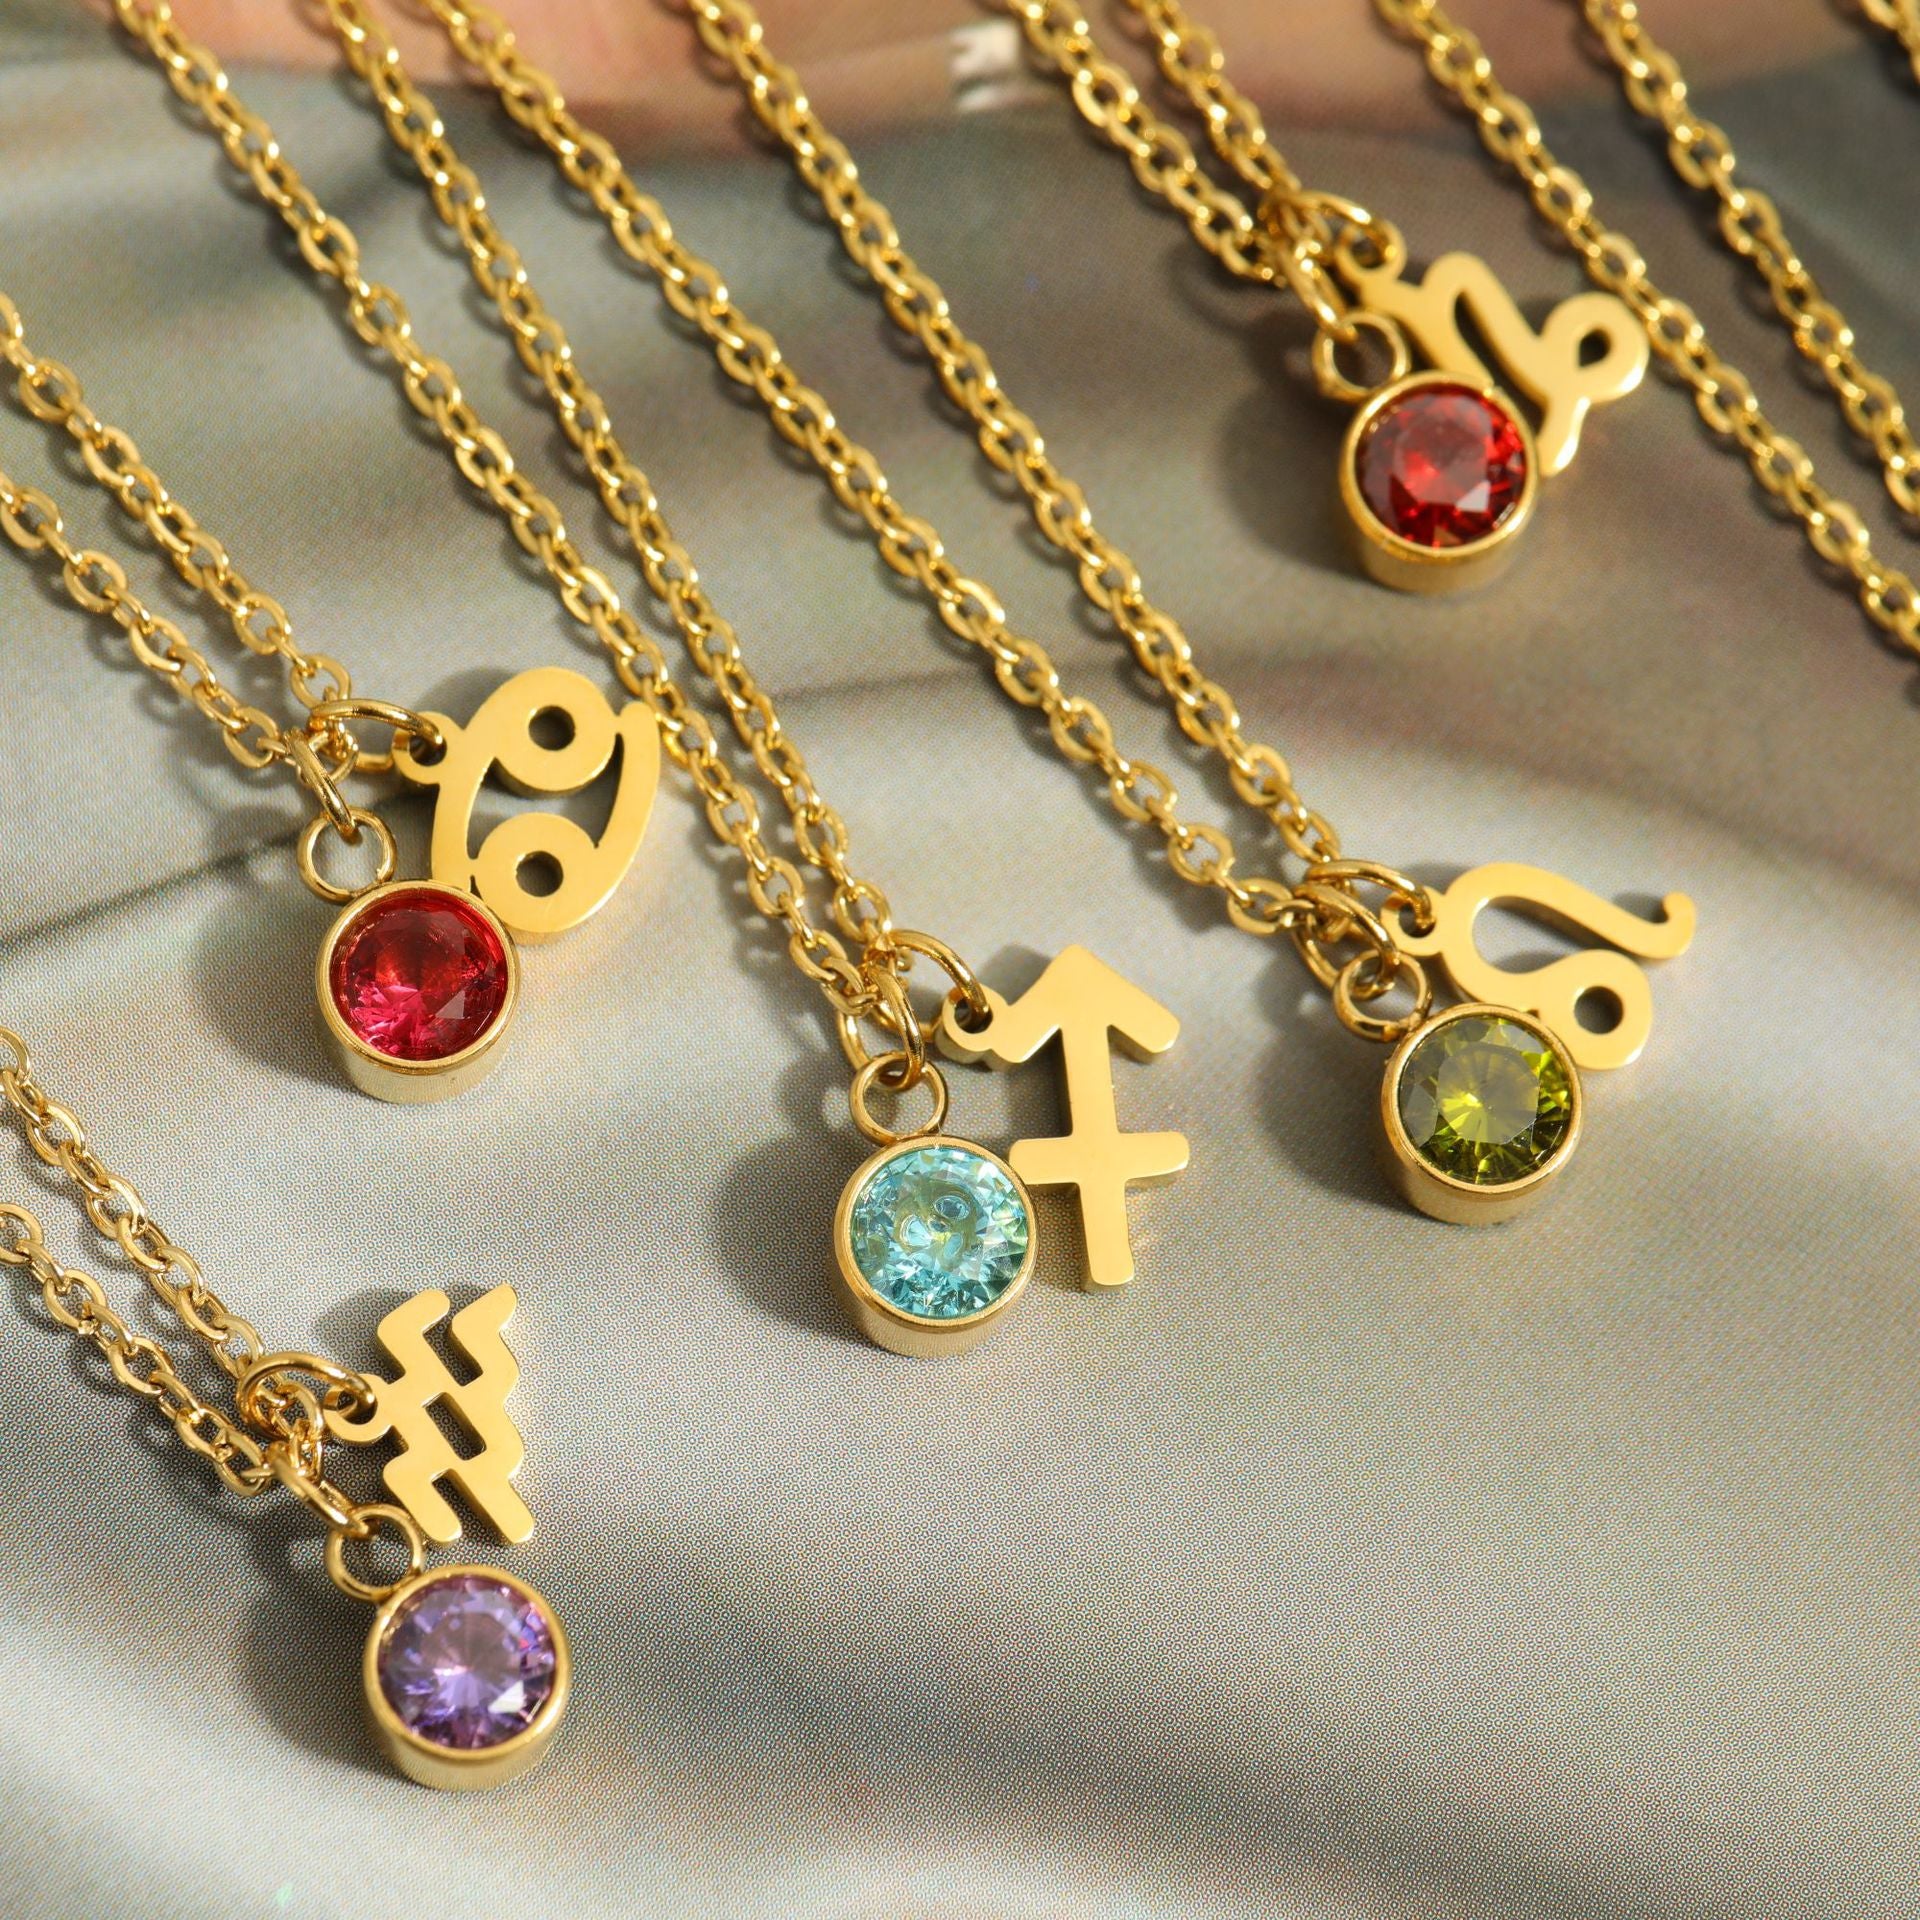 Close up of Zodiac Necklaces on Display